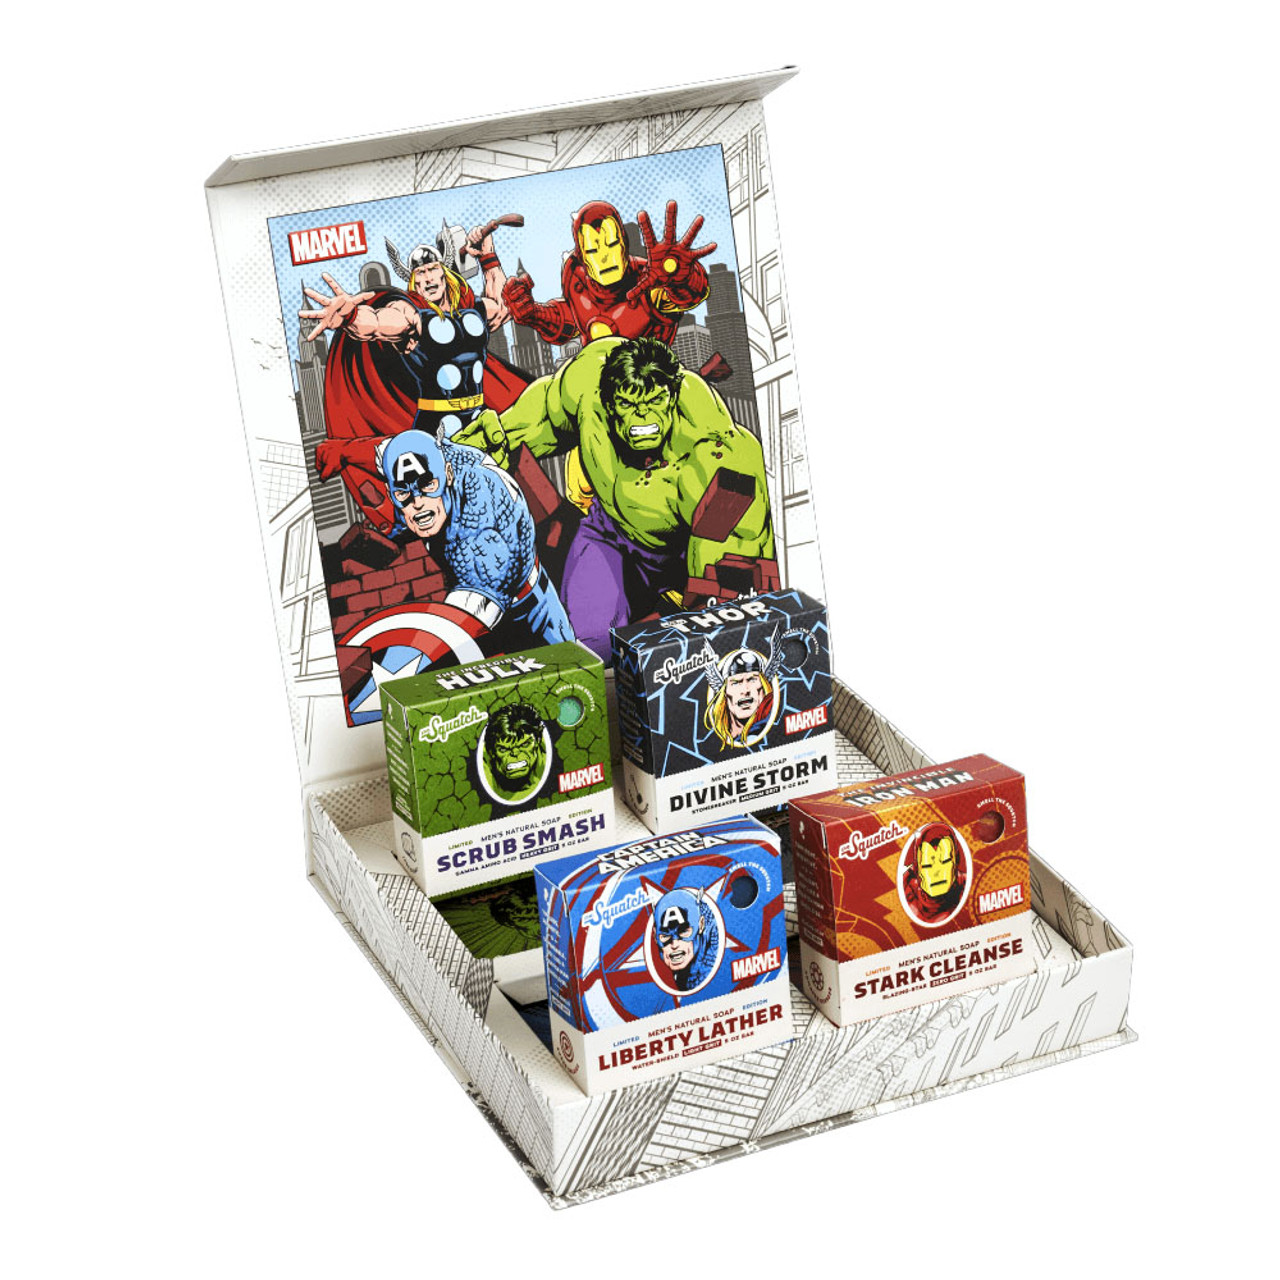 https://cdn11.bigcommerce.com/s-zut1msomd6/images/stencil/1280x1280/products/39612/239643/Dr-squatch-soaps-avengers-collection-box-kit-avg-01-avengers-collection-open__57637.1695999557.jpg?c=1